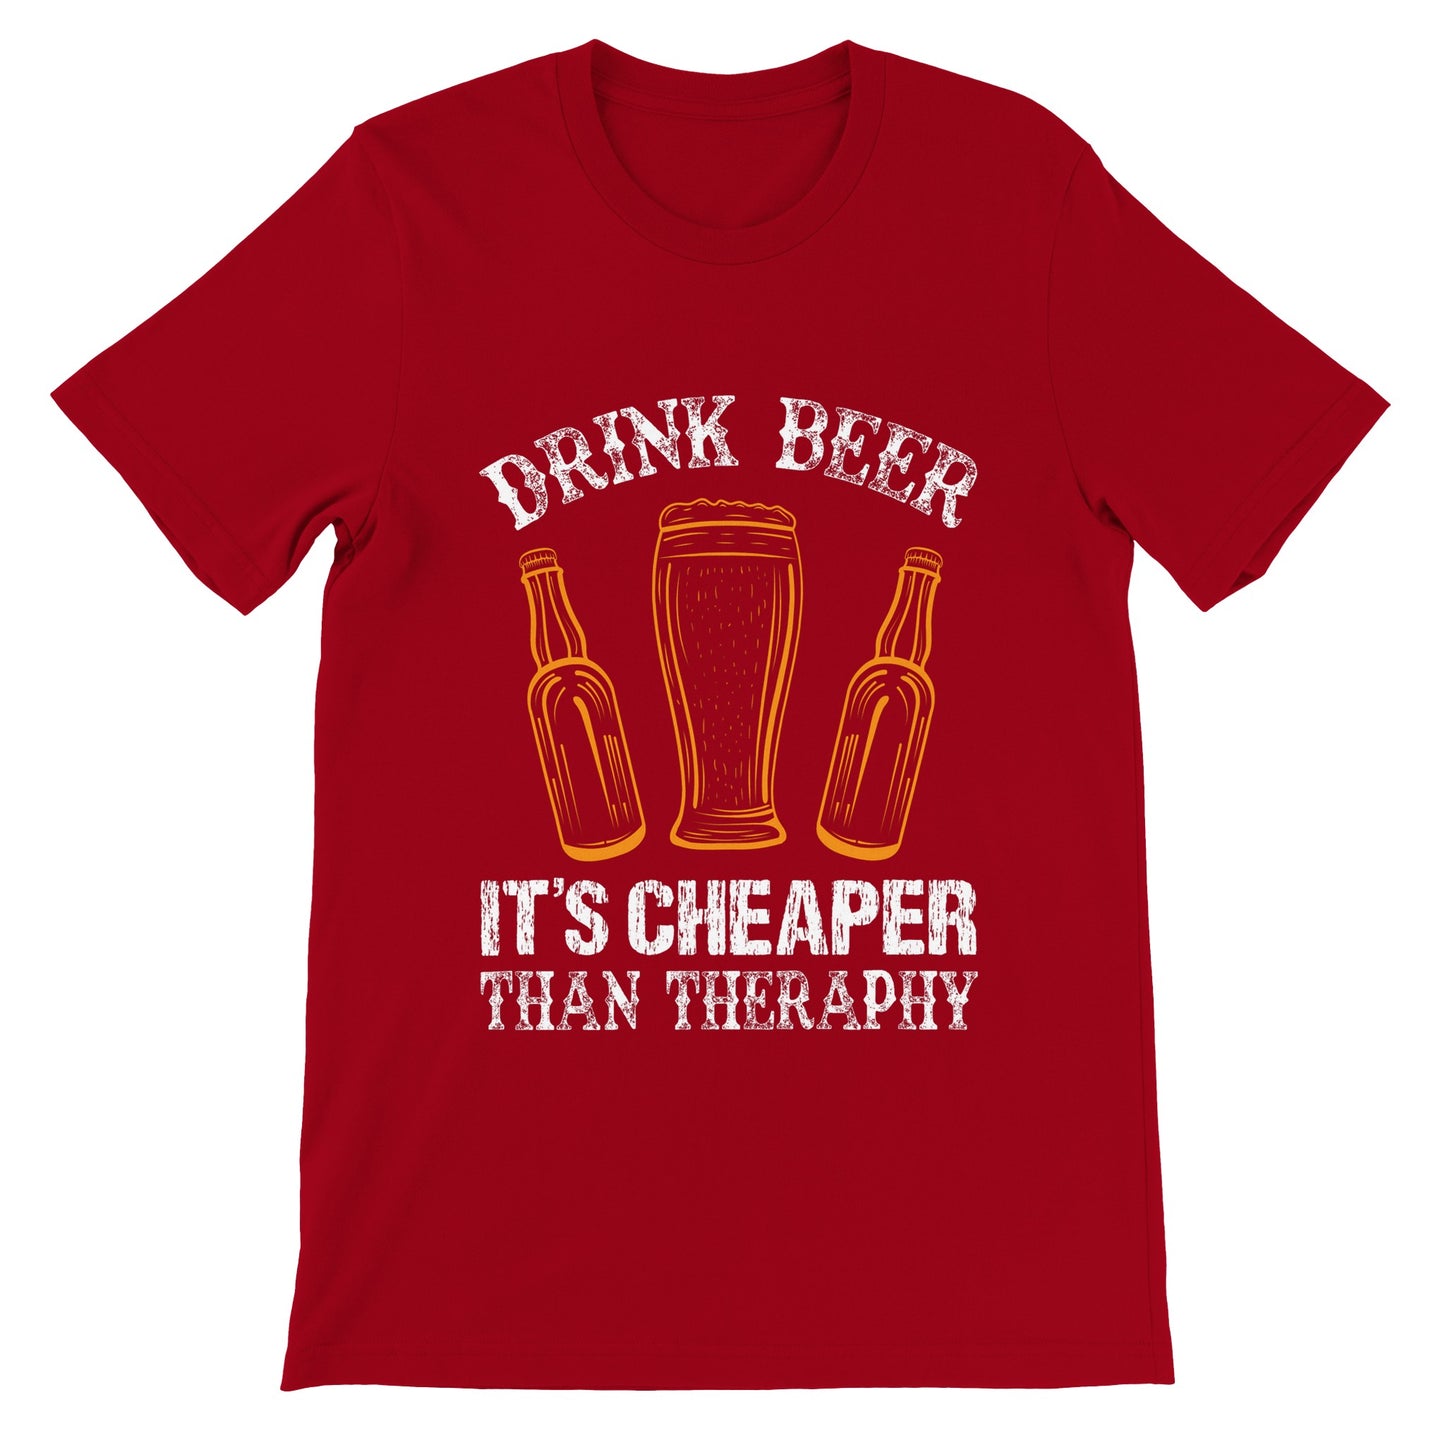 Funny T-Shirts - Drink Beer, It's Cheaper Than Theraphy - Premium Unisex T-Shirt 